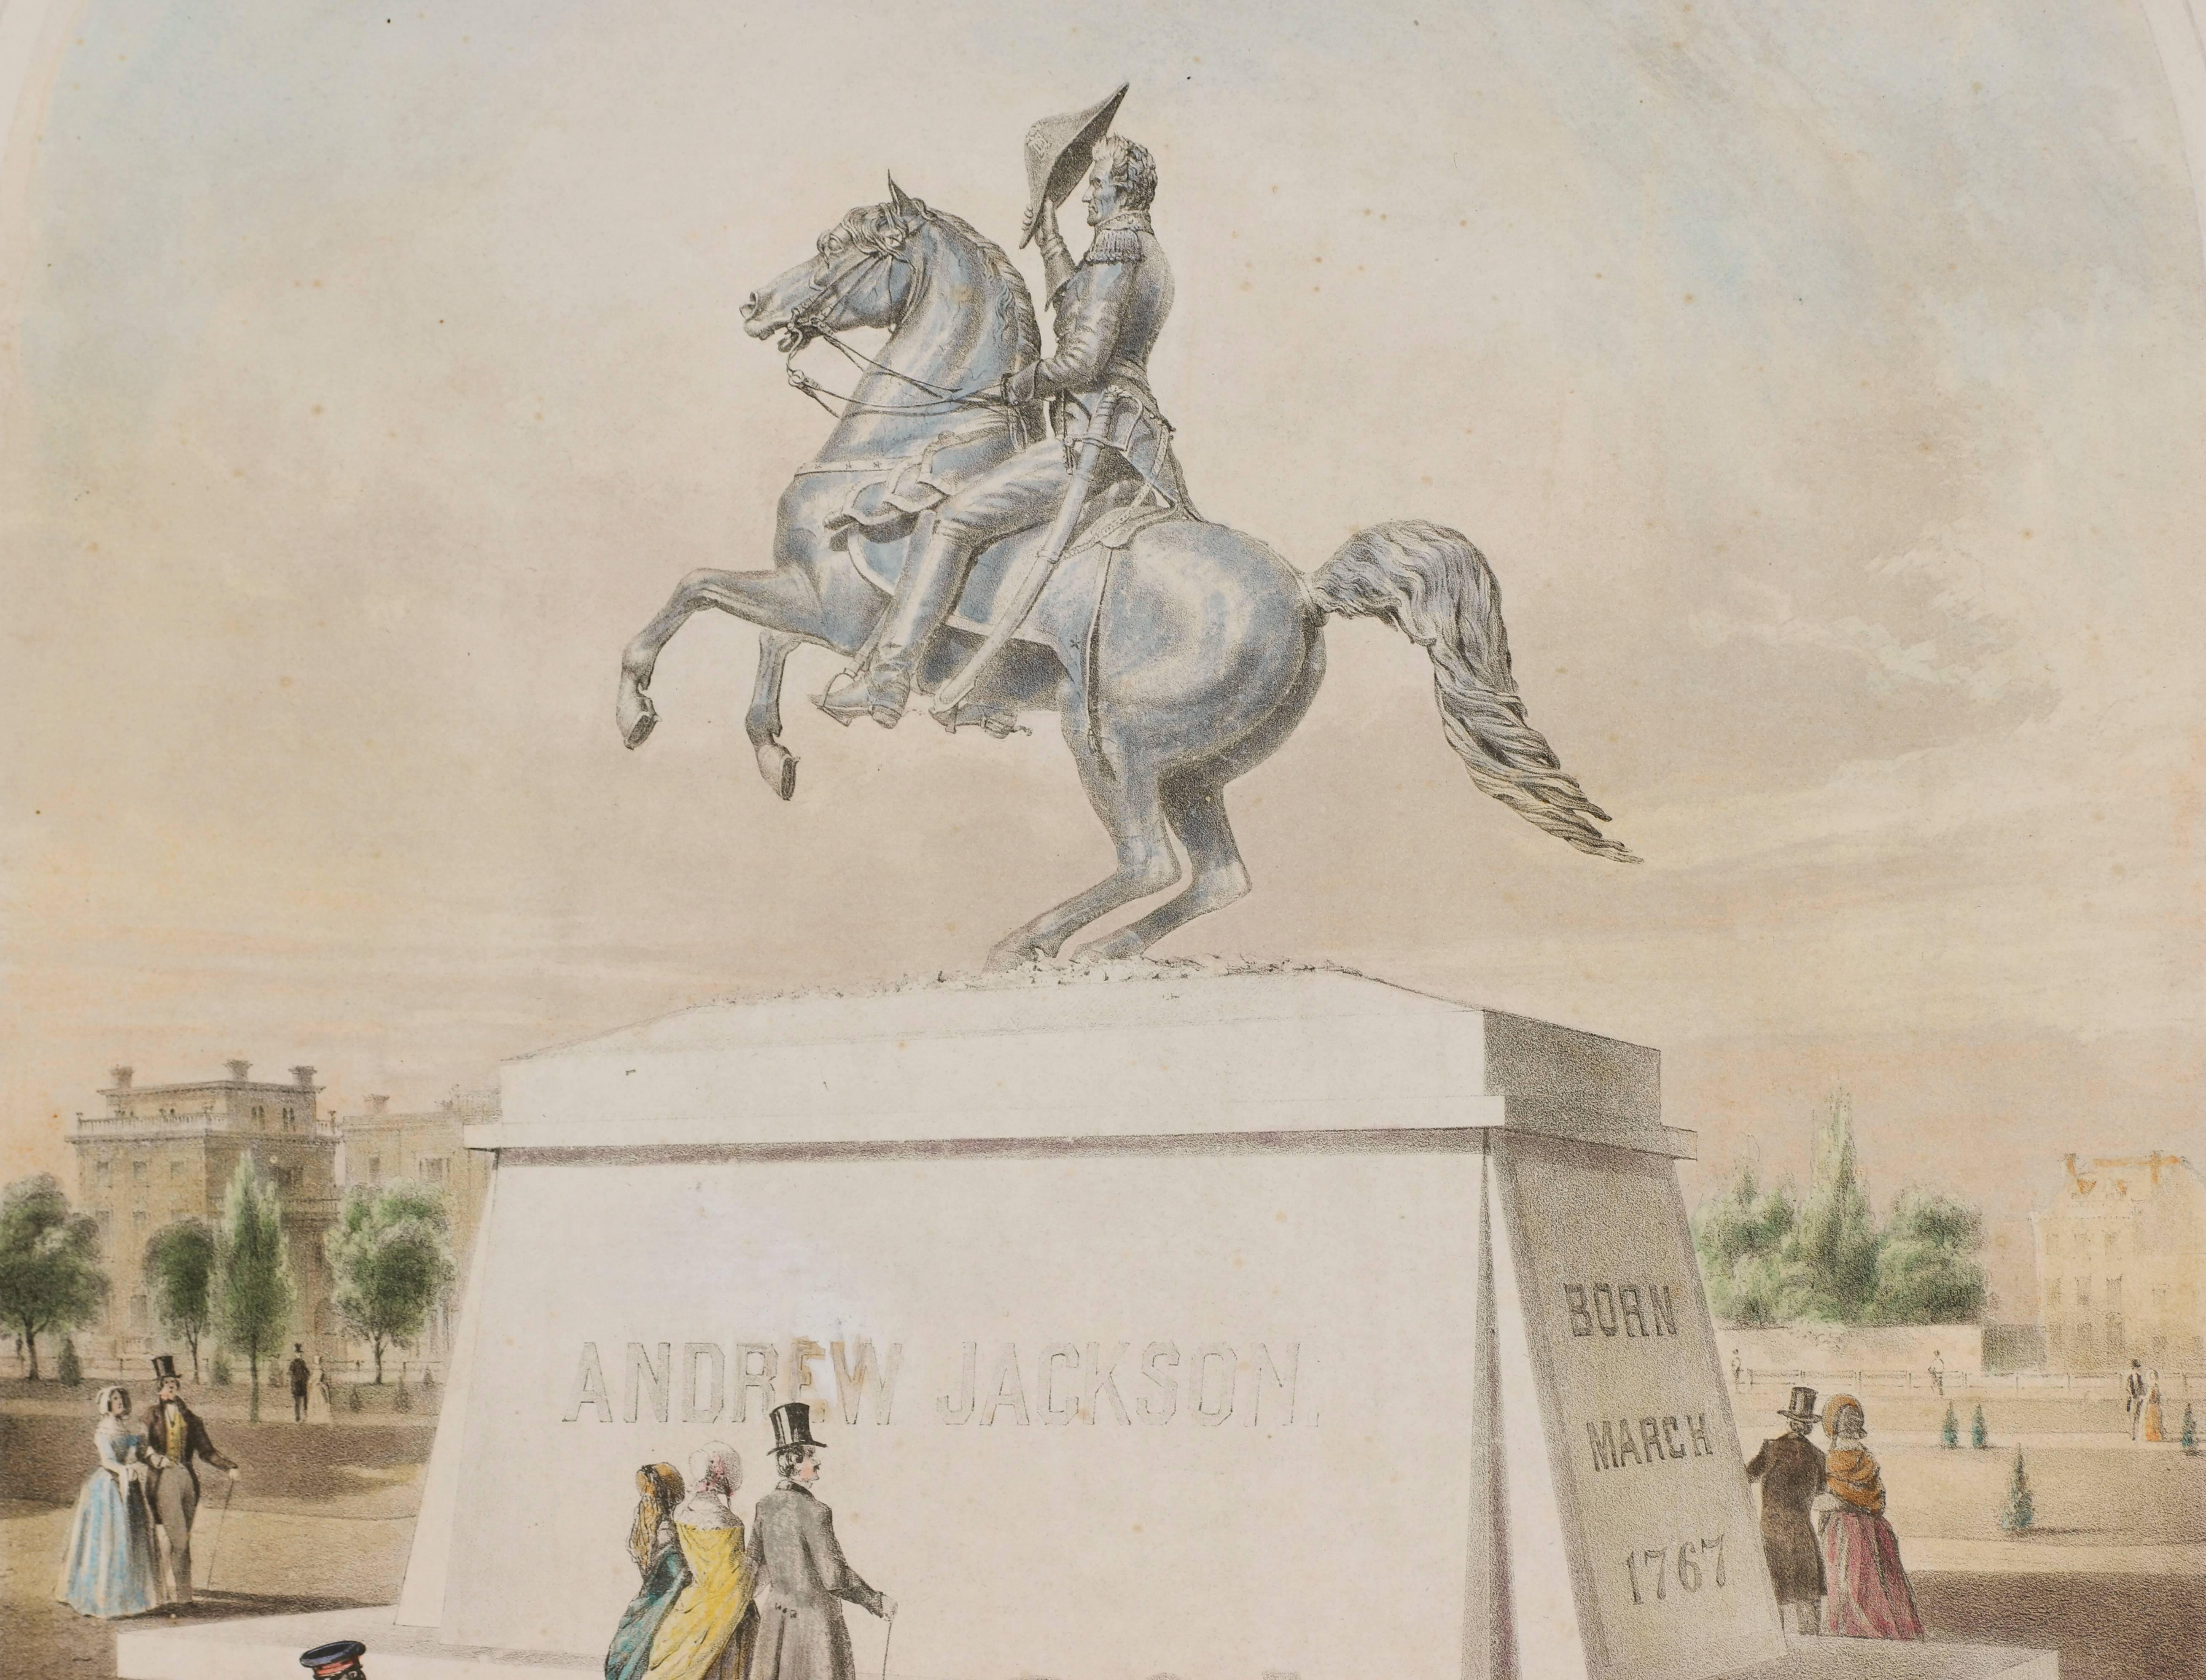 1853 Lithograph of Bronze Statue of General Andrew Jackson - Print by Clark Mills